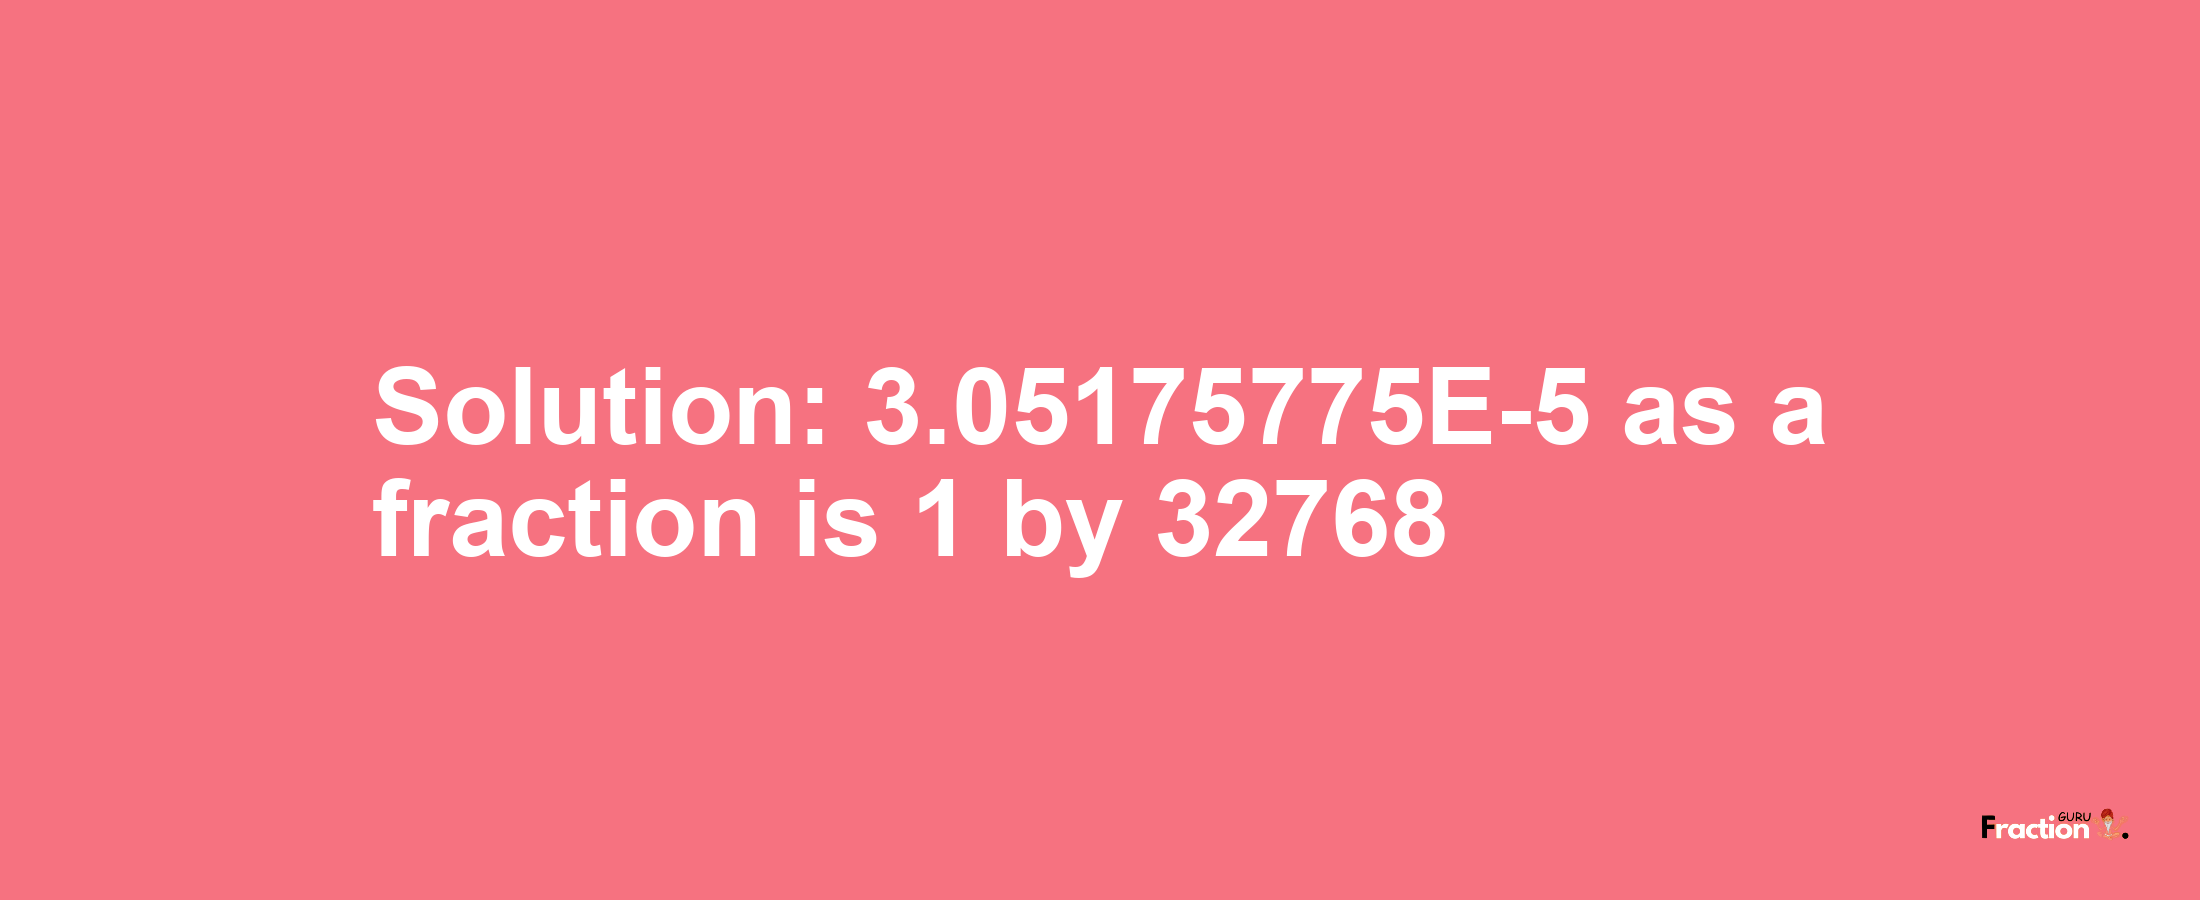 Solution:3.05175775E-5 as a fraction is 1/32768